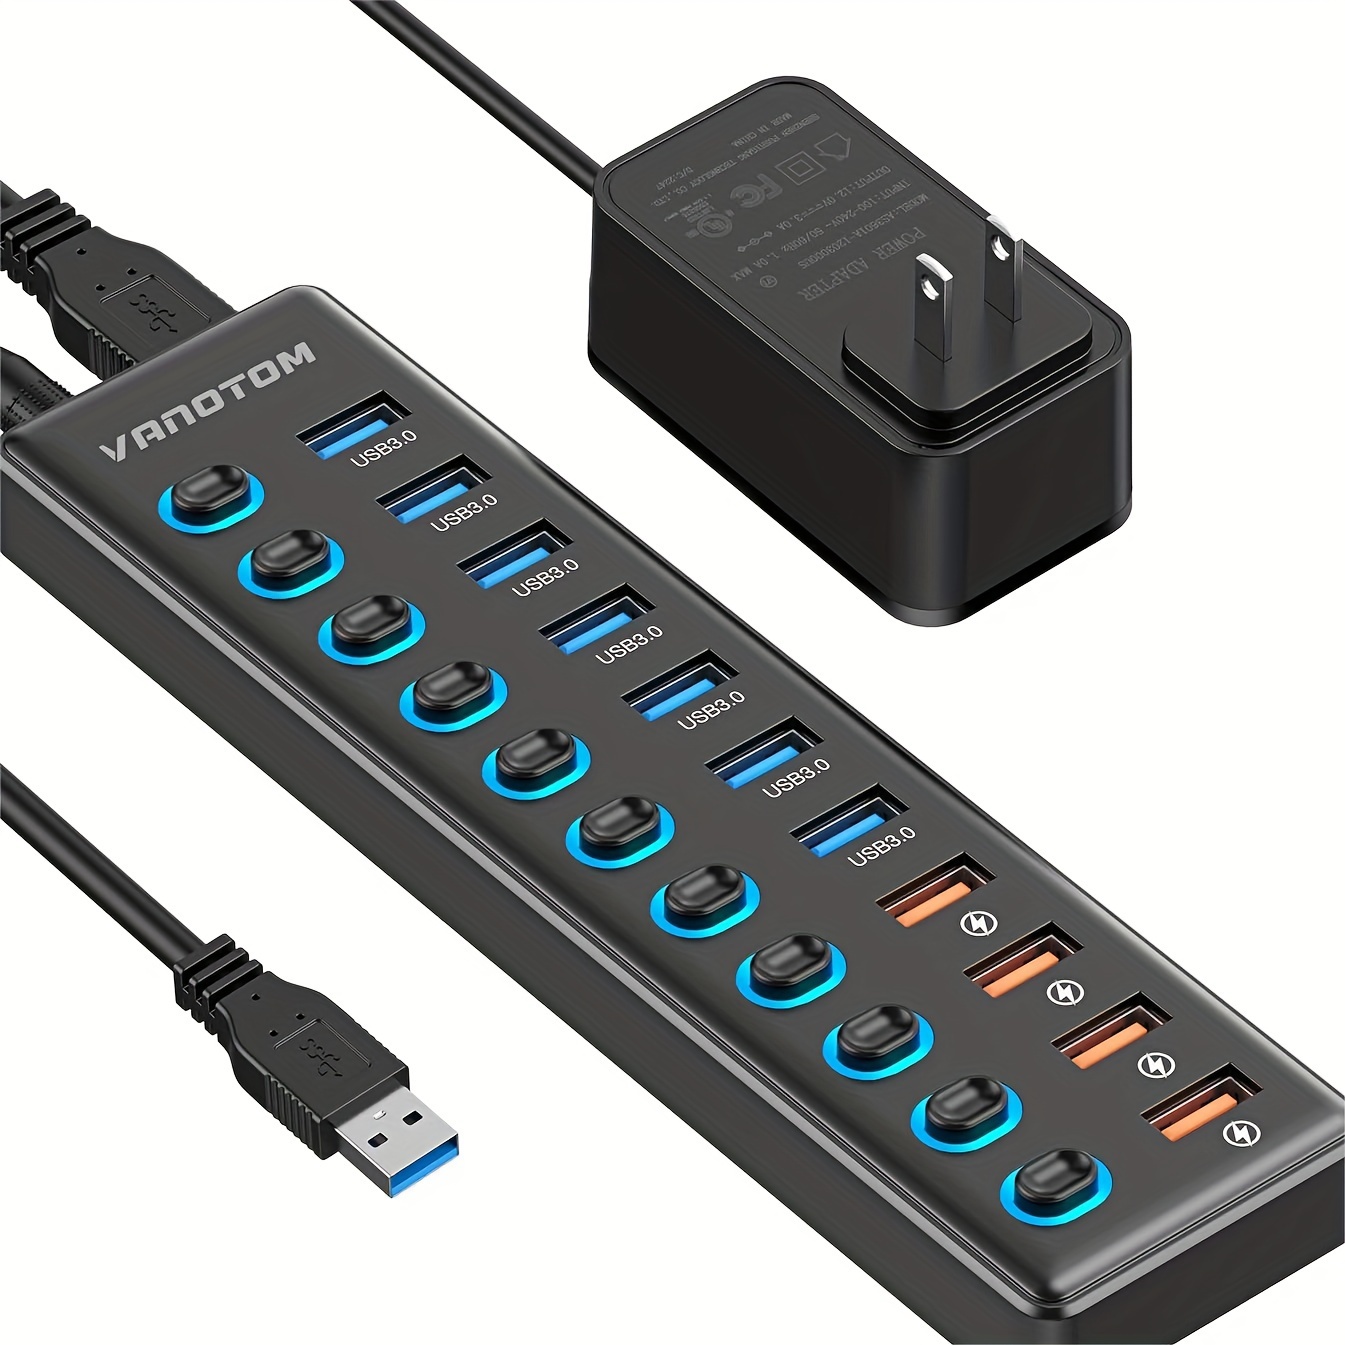 

Powered Usb 3.0, Vanotom 11-port Usb Splitter (7 Usb 3.0 Data Ports + 4 Smart Charging Port) With 12v/3a Power Adapter And Led Individual On/off Switches For Laptop And Pc